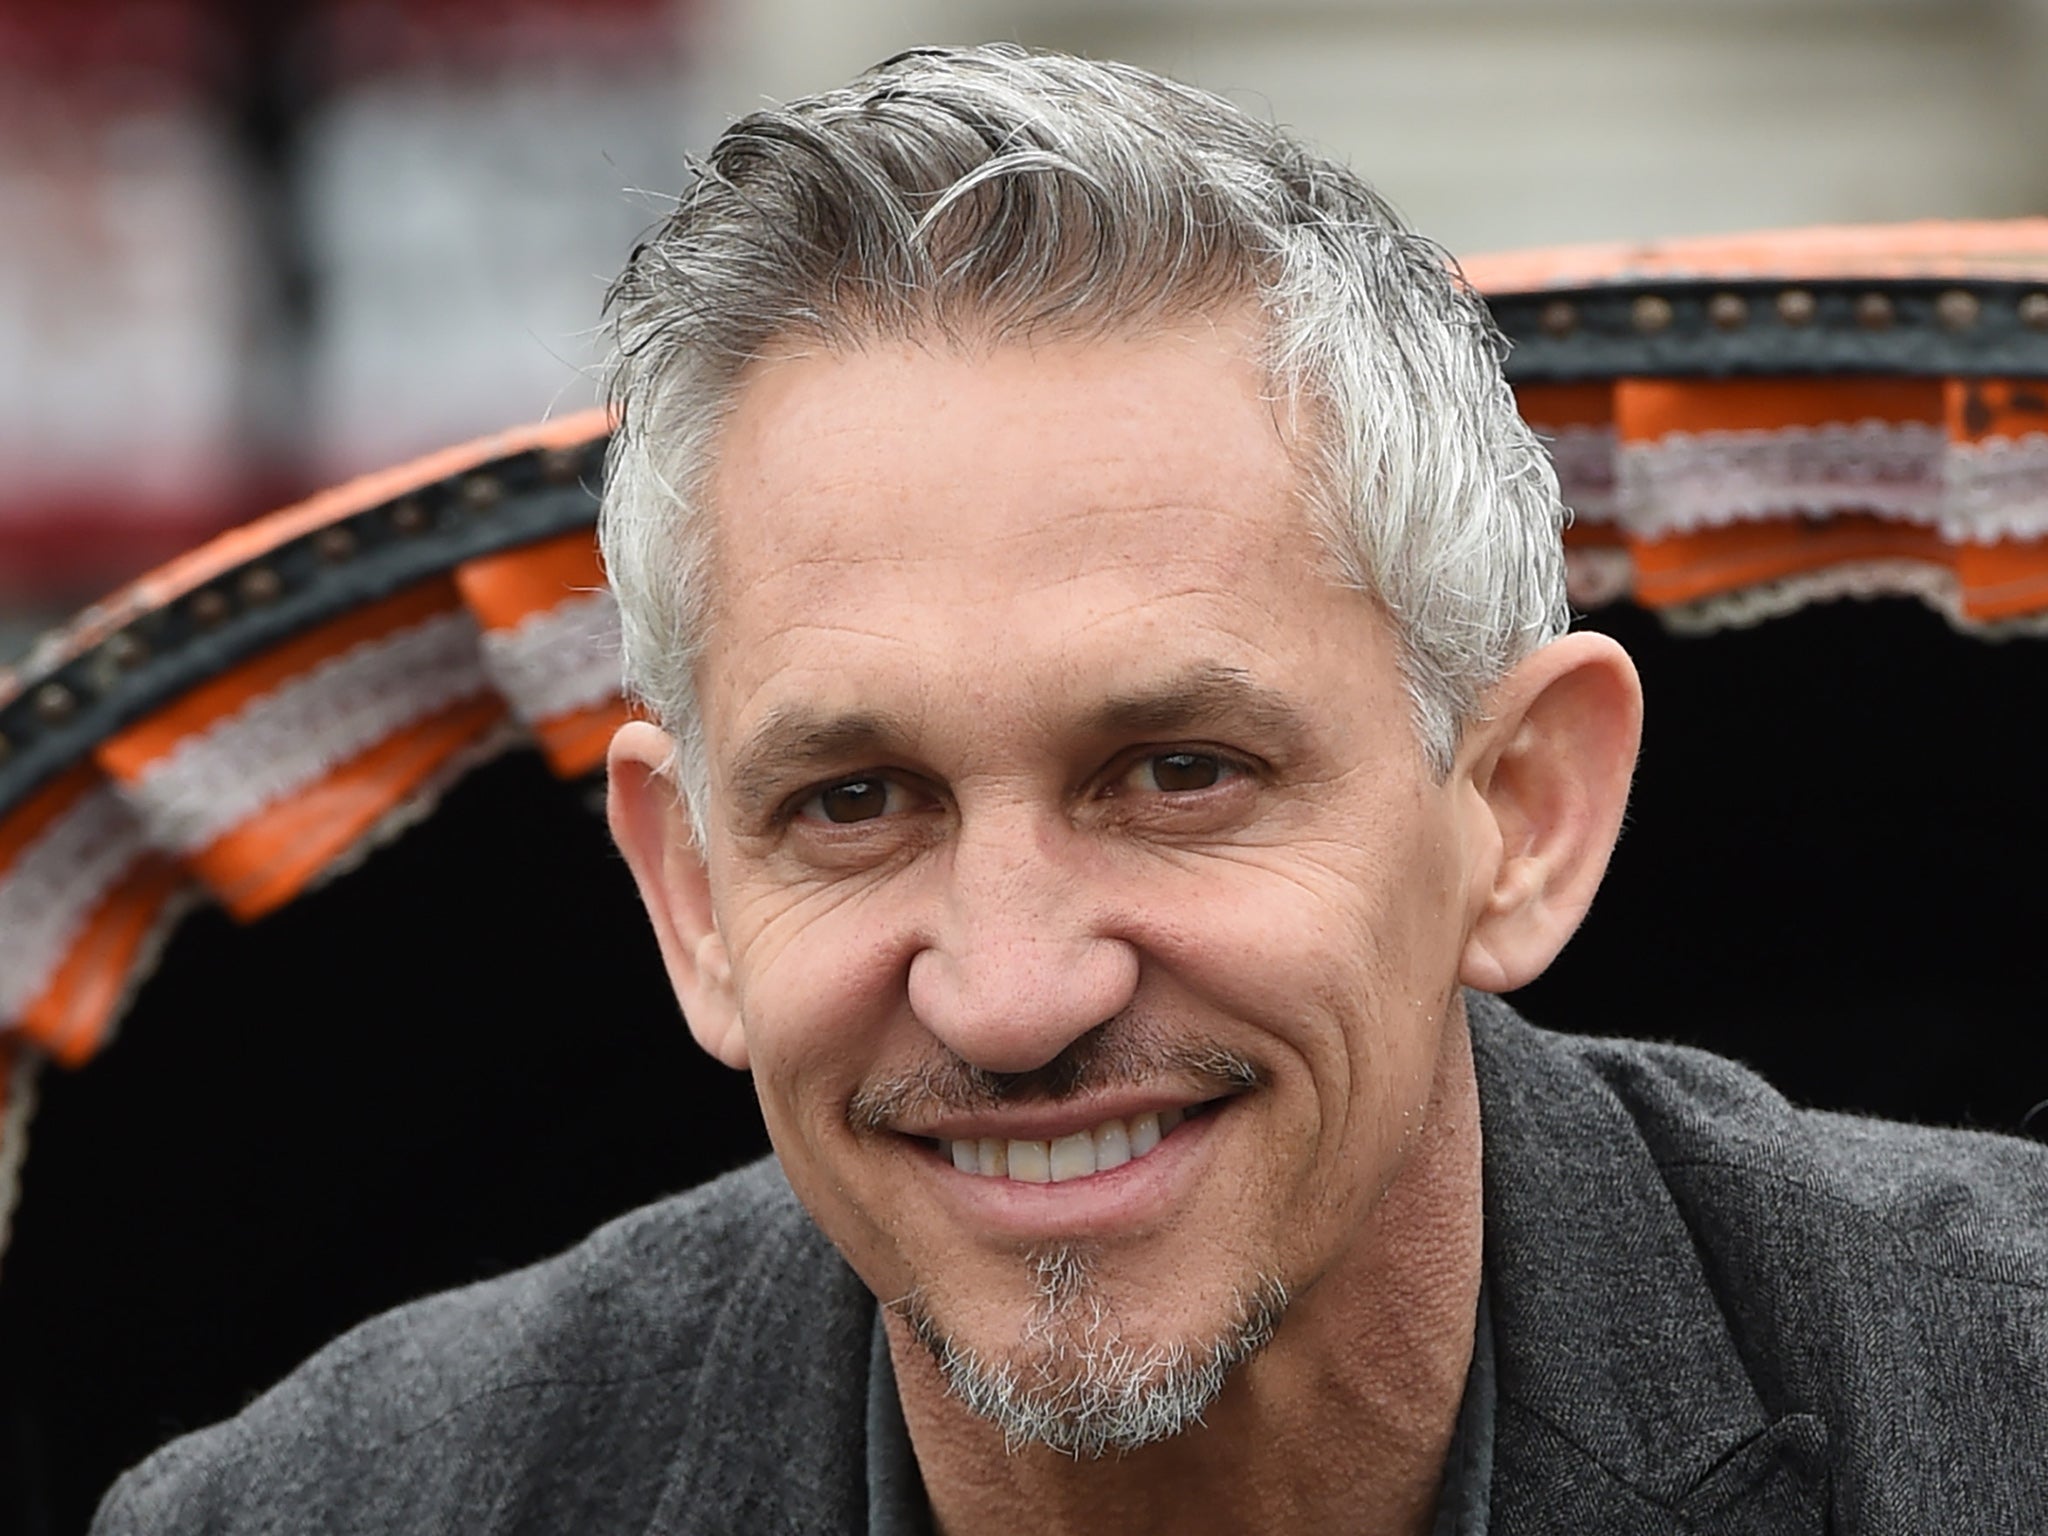 Lineker has already been asked for his observations on England's tournament